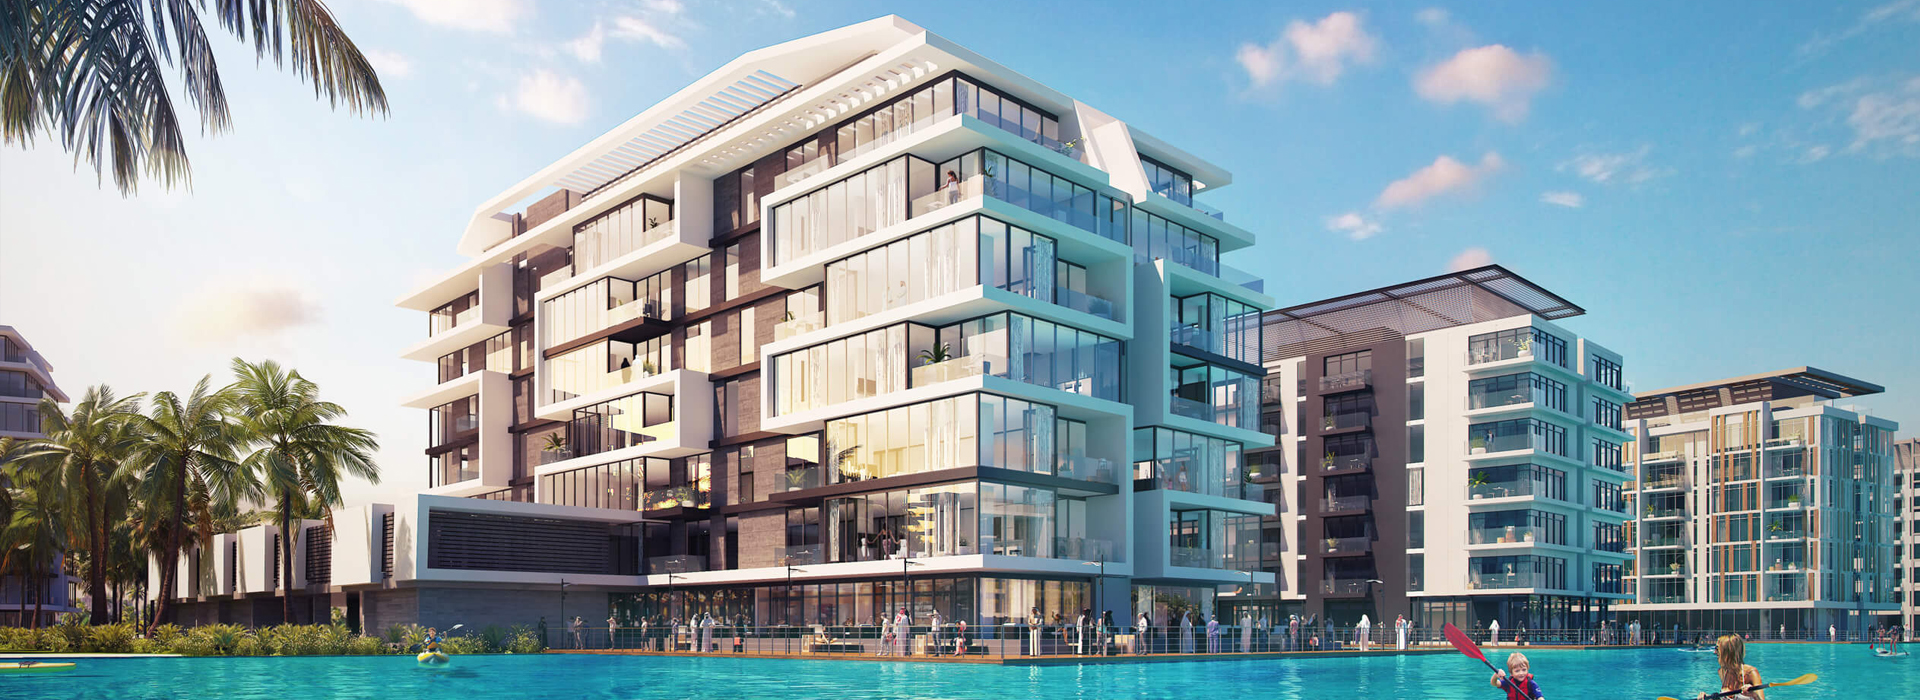 District One Residences at MBR City Dubai